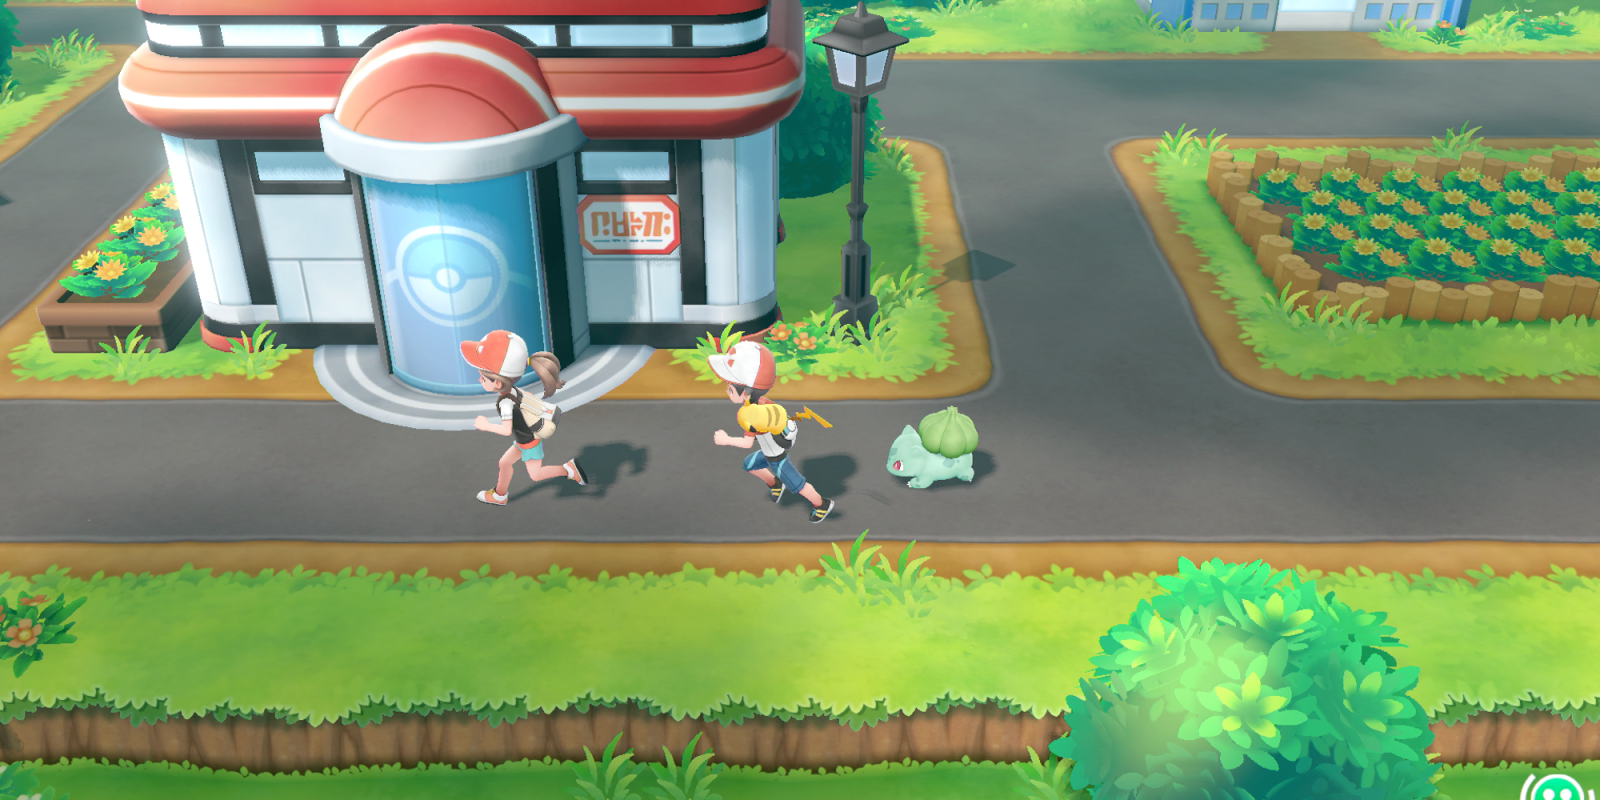 Return To Pallet Town In Pokémon Lets Go Pikachu Coming